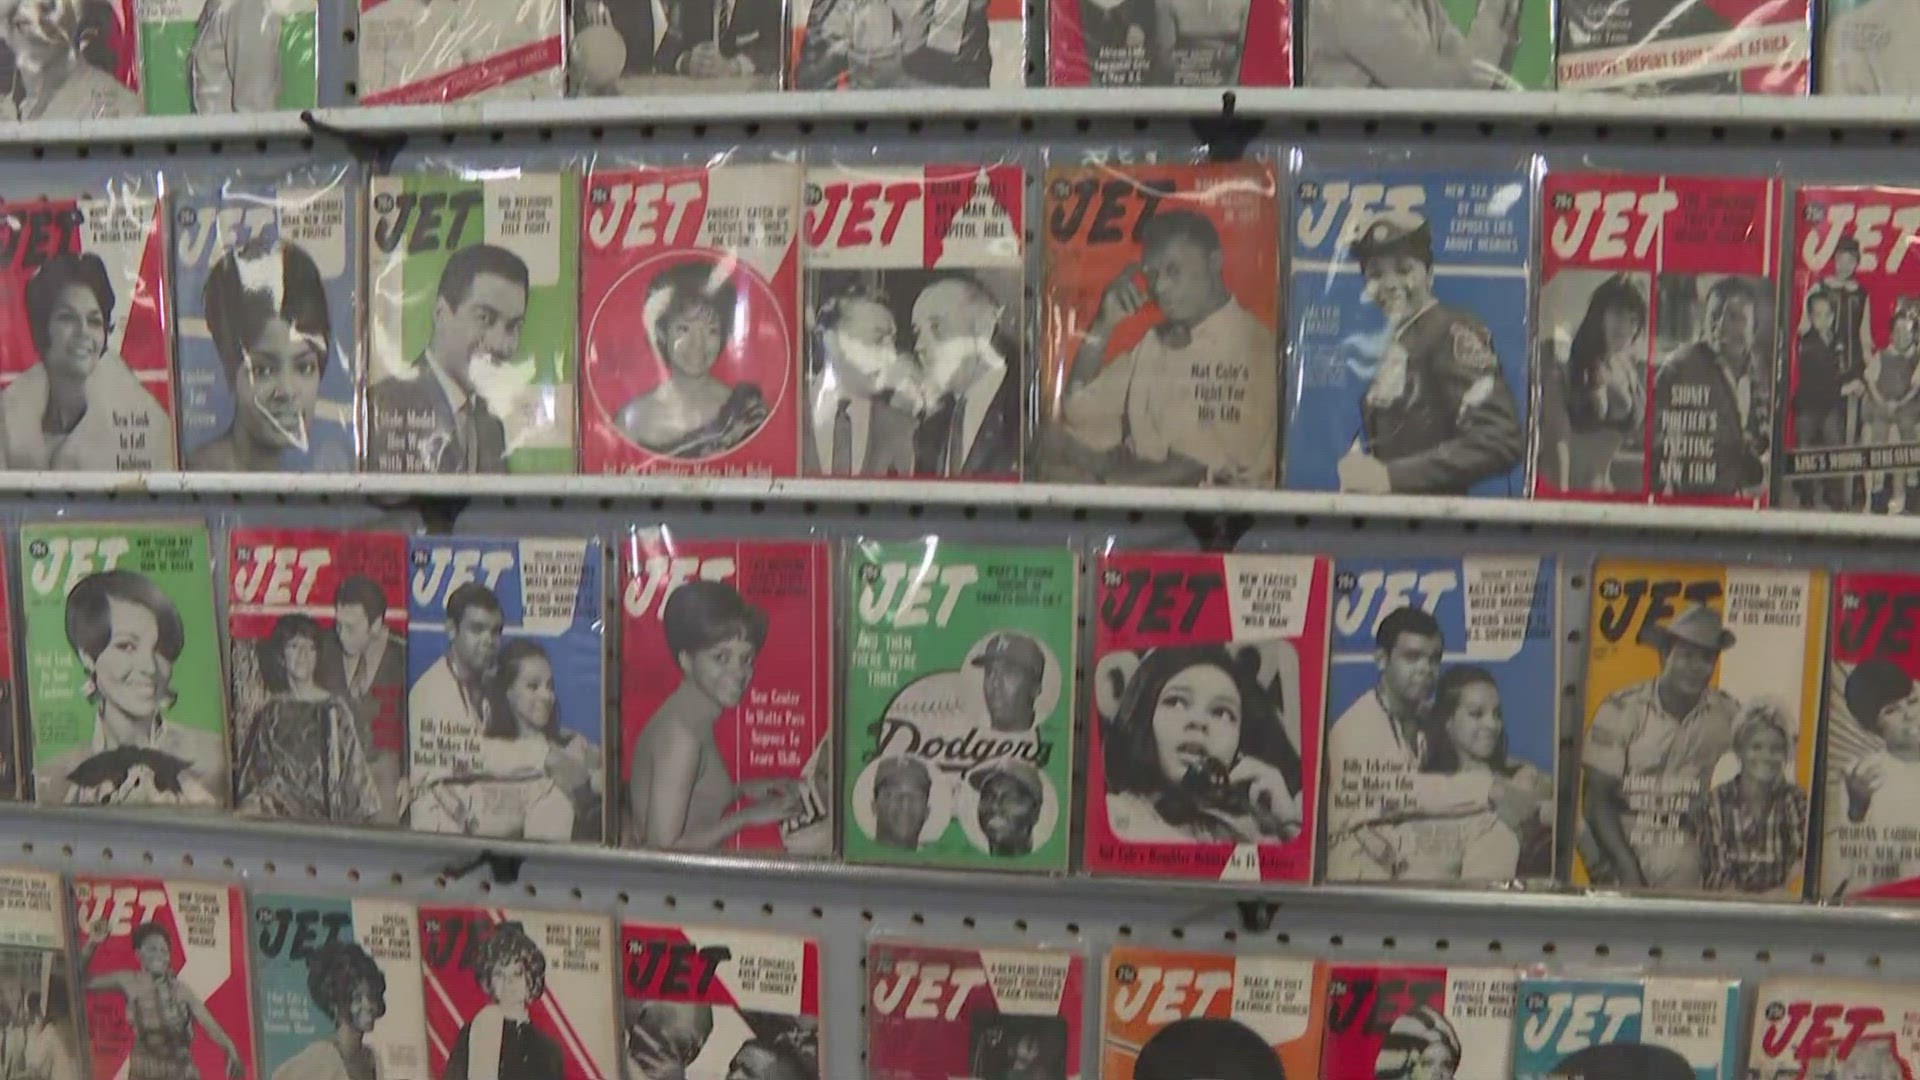 Growing up, Effley Howell remembers his parents getting Ebony and JET magazines in the mail.